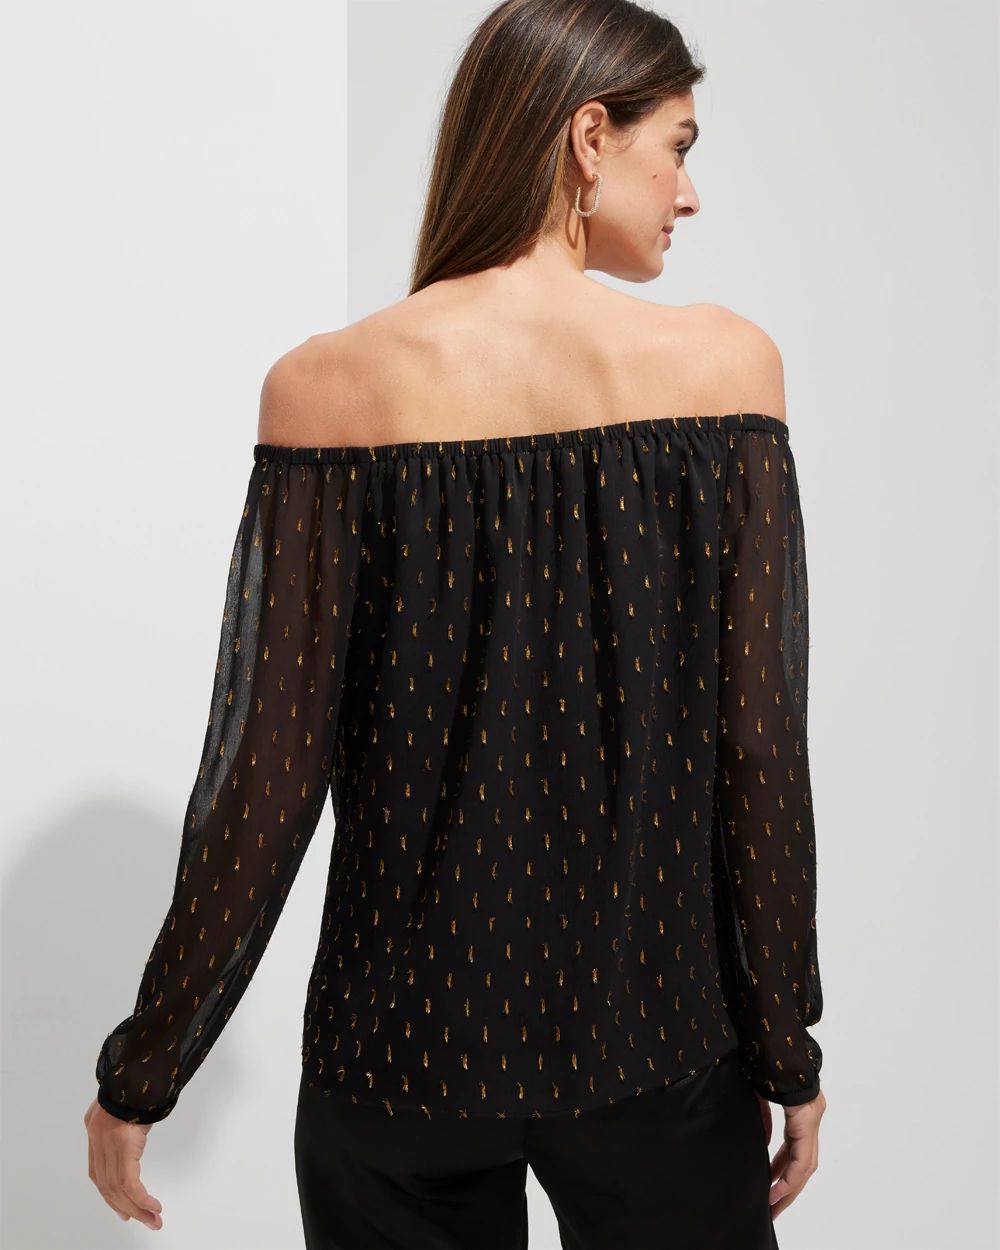 Outlet WHBM Off-The-Shoulder Clip Blouse click to view larger image.